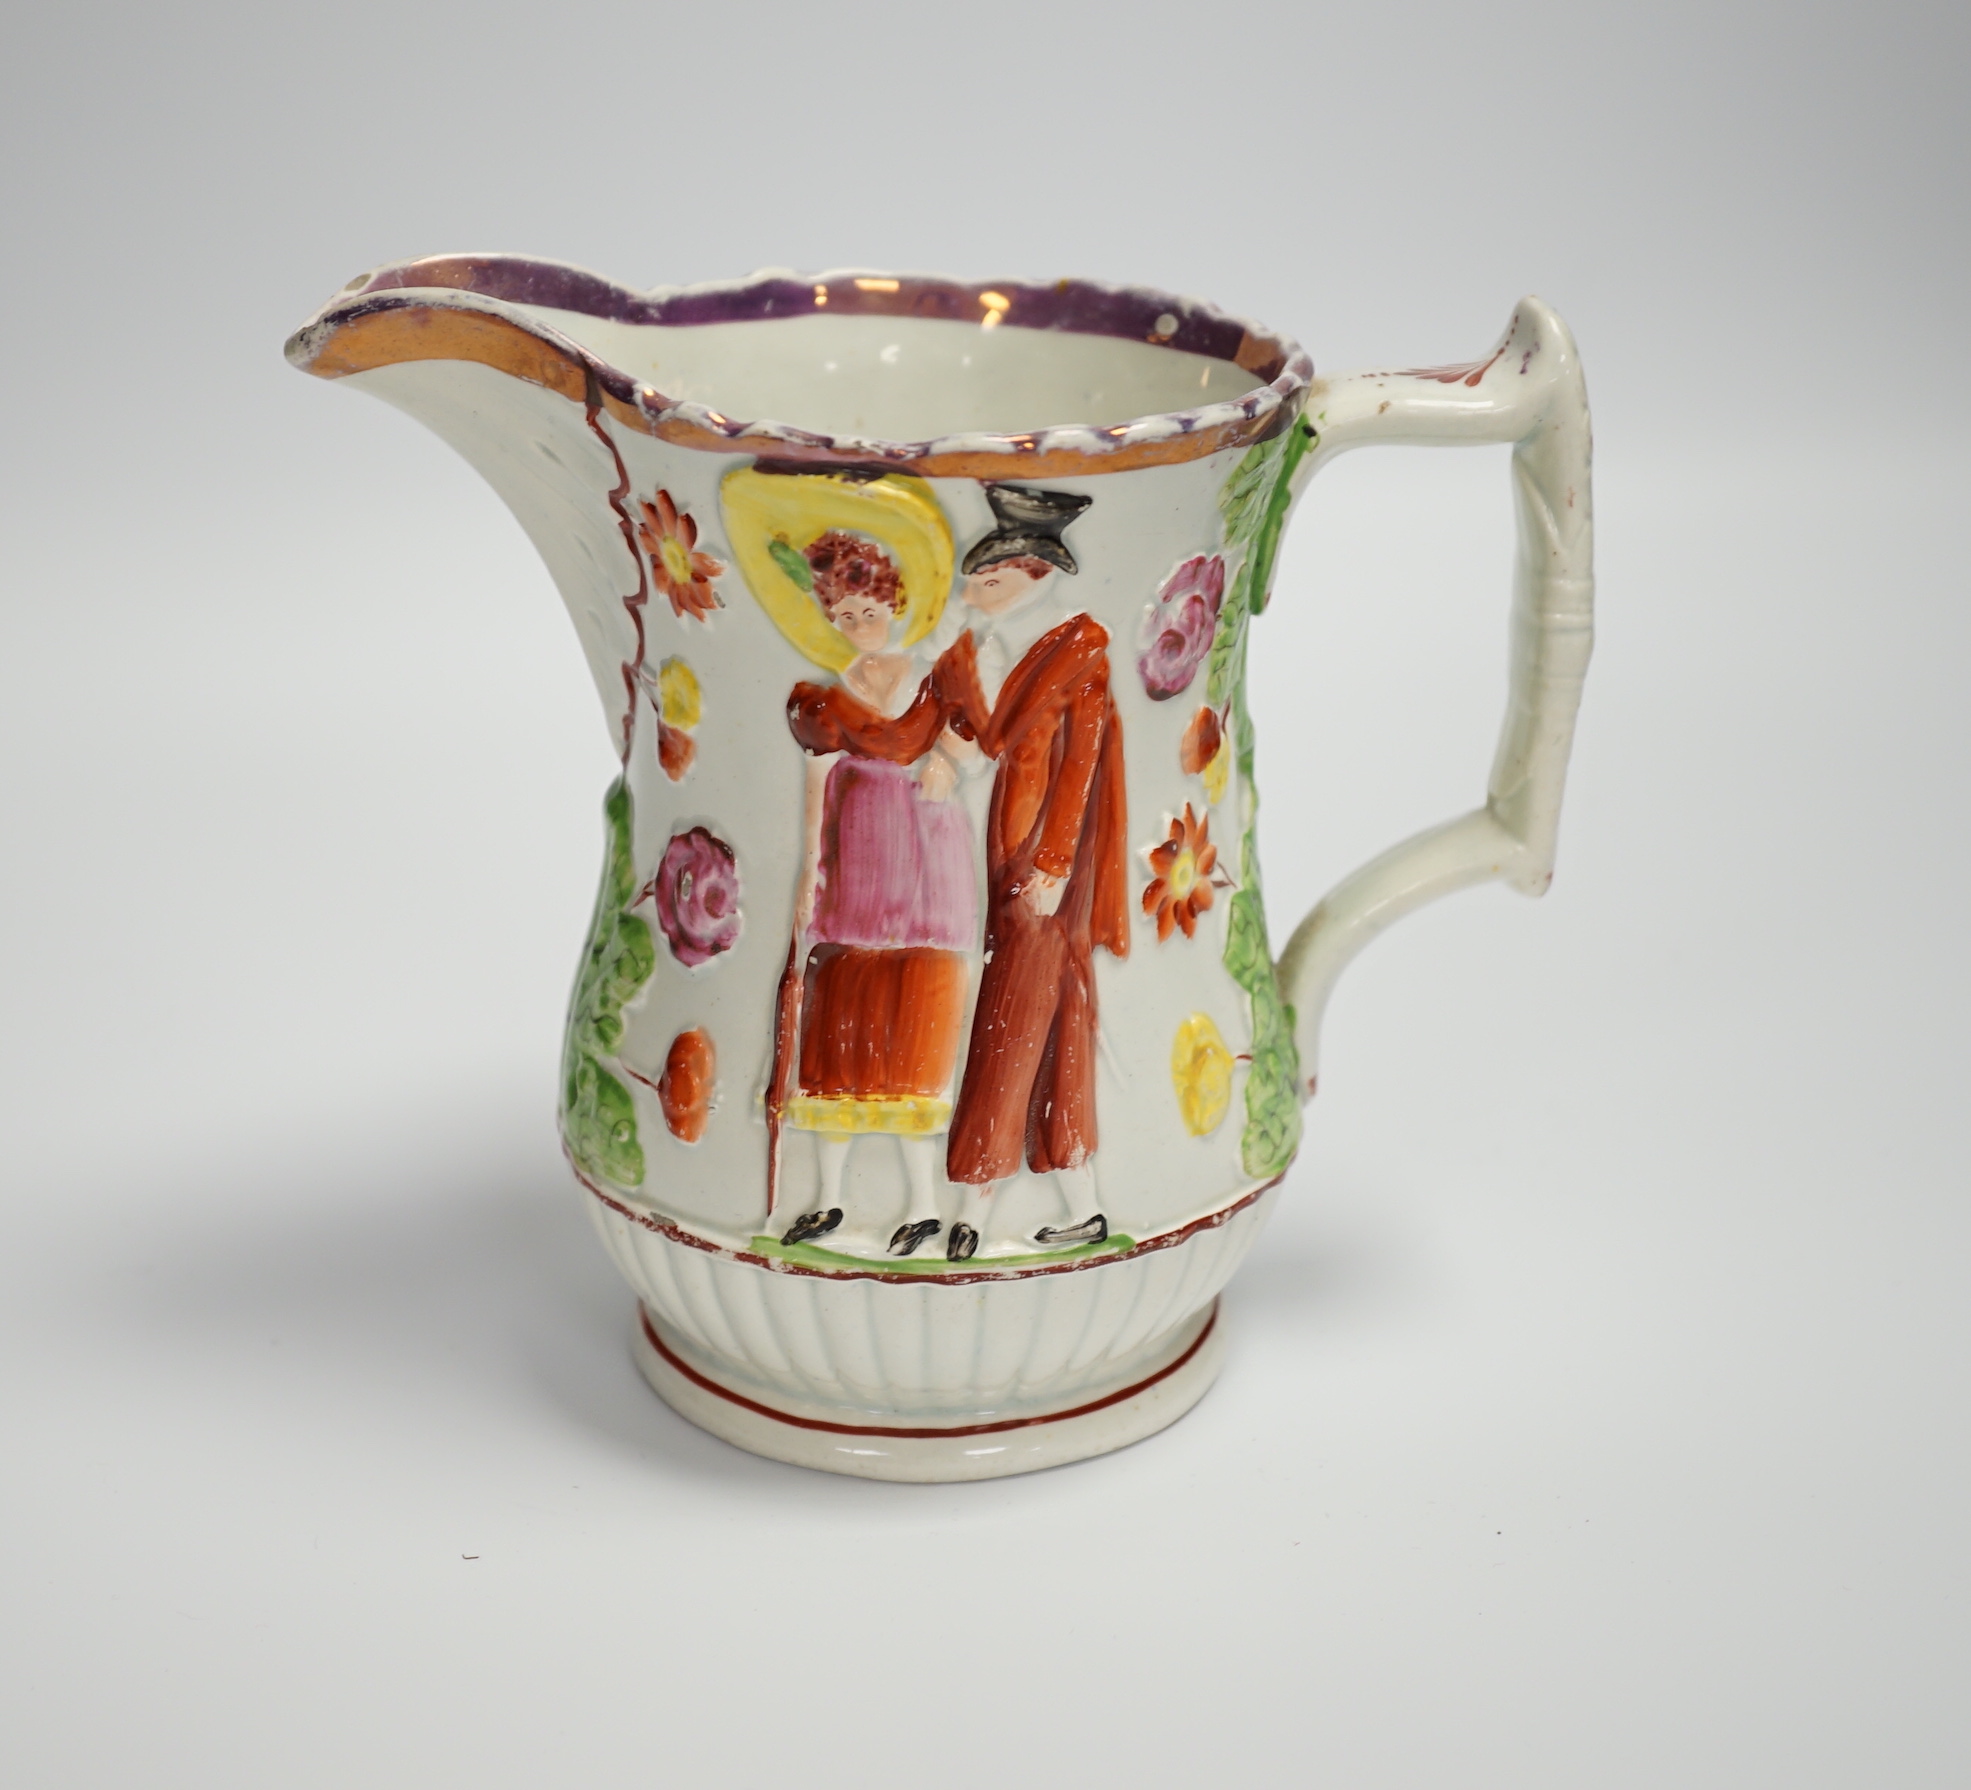 A relief moulded 19th century Staffordshire pearlware jug, 15cm high***CONDITION REPORT***PLEASE